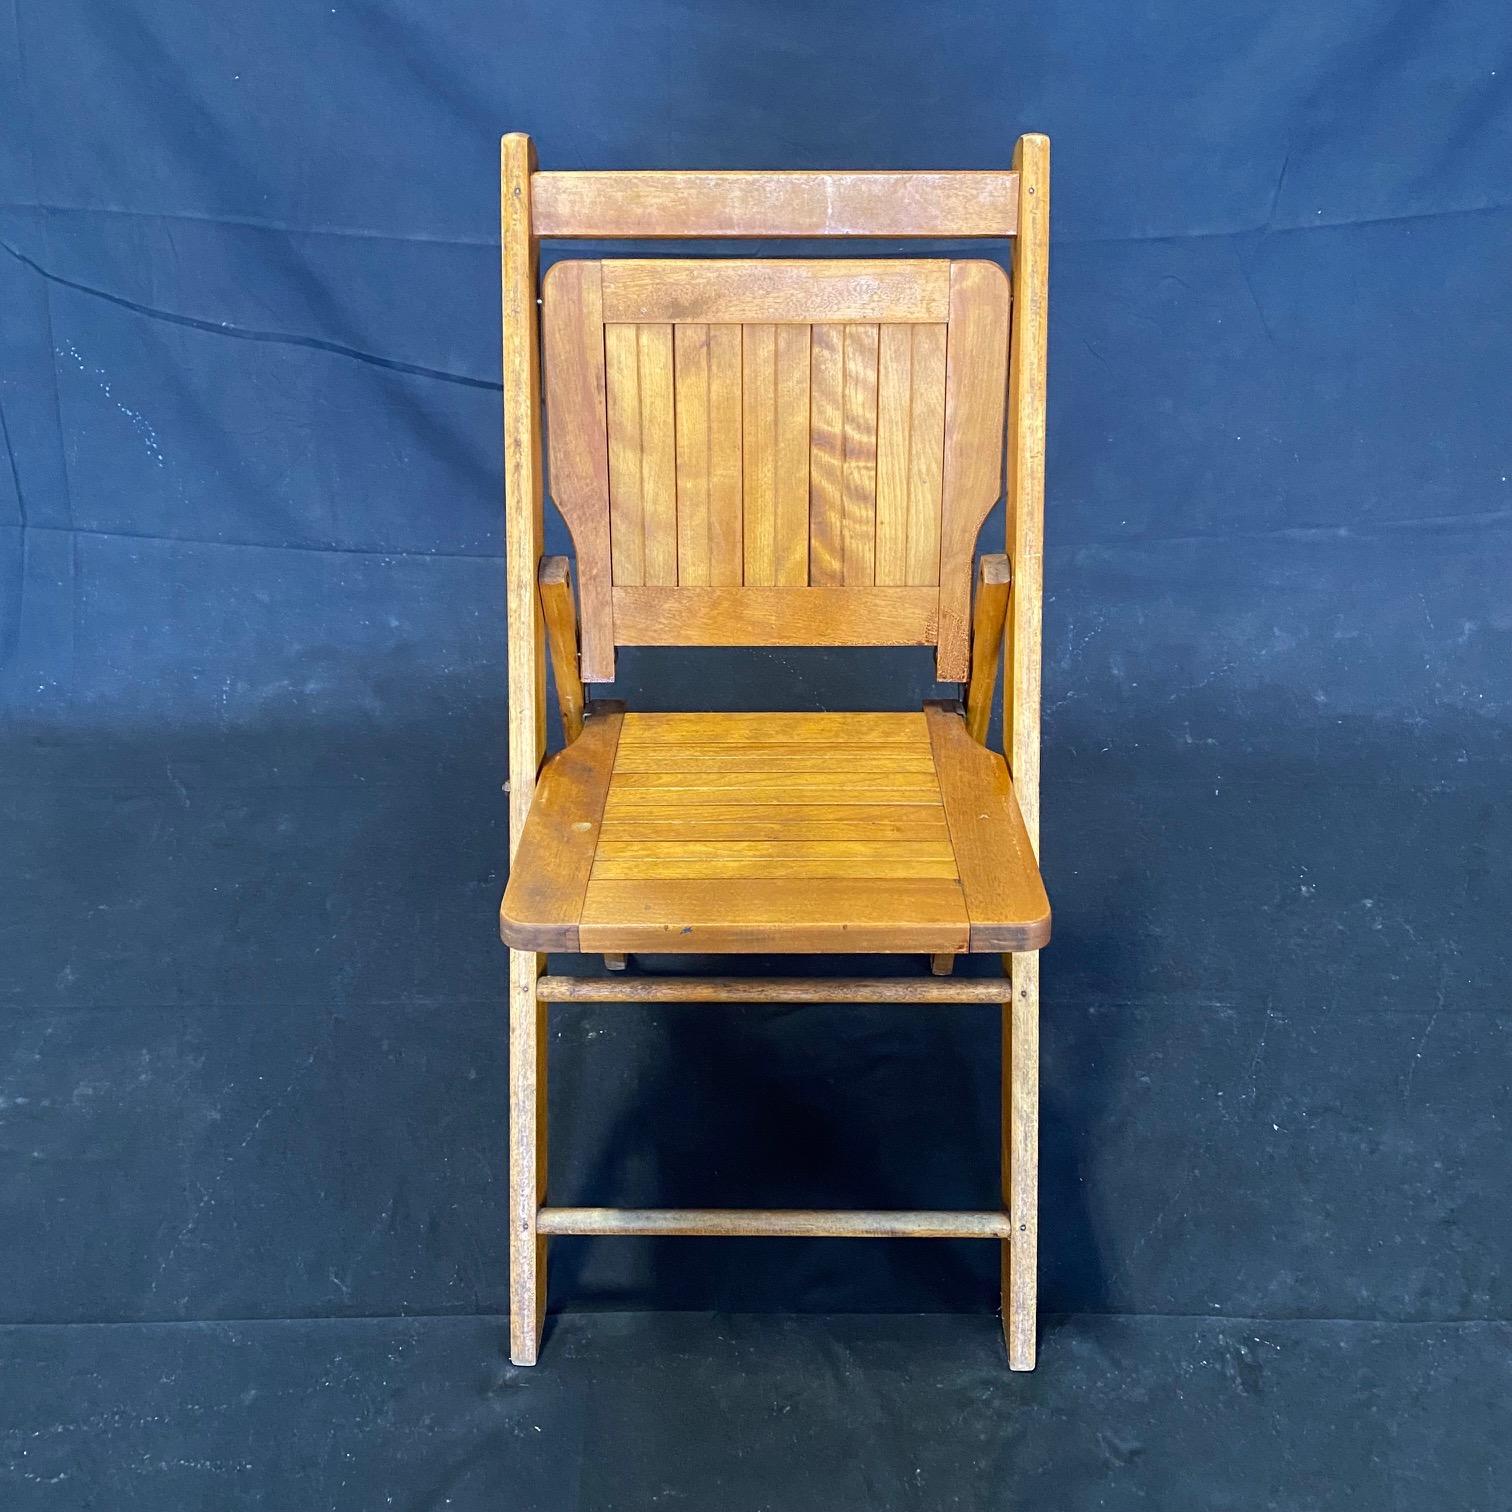 American Set of 12 Vintage Wooden Stackable Folding Chairs from Paris Manufacturing Co.